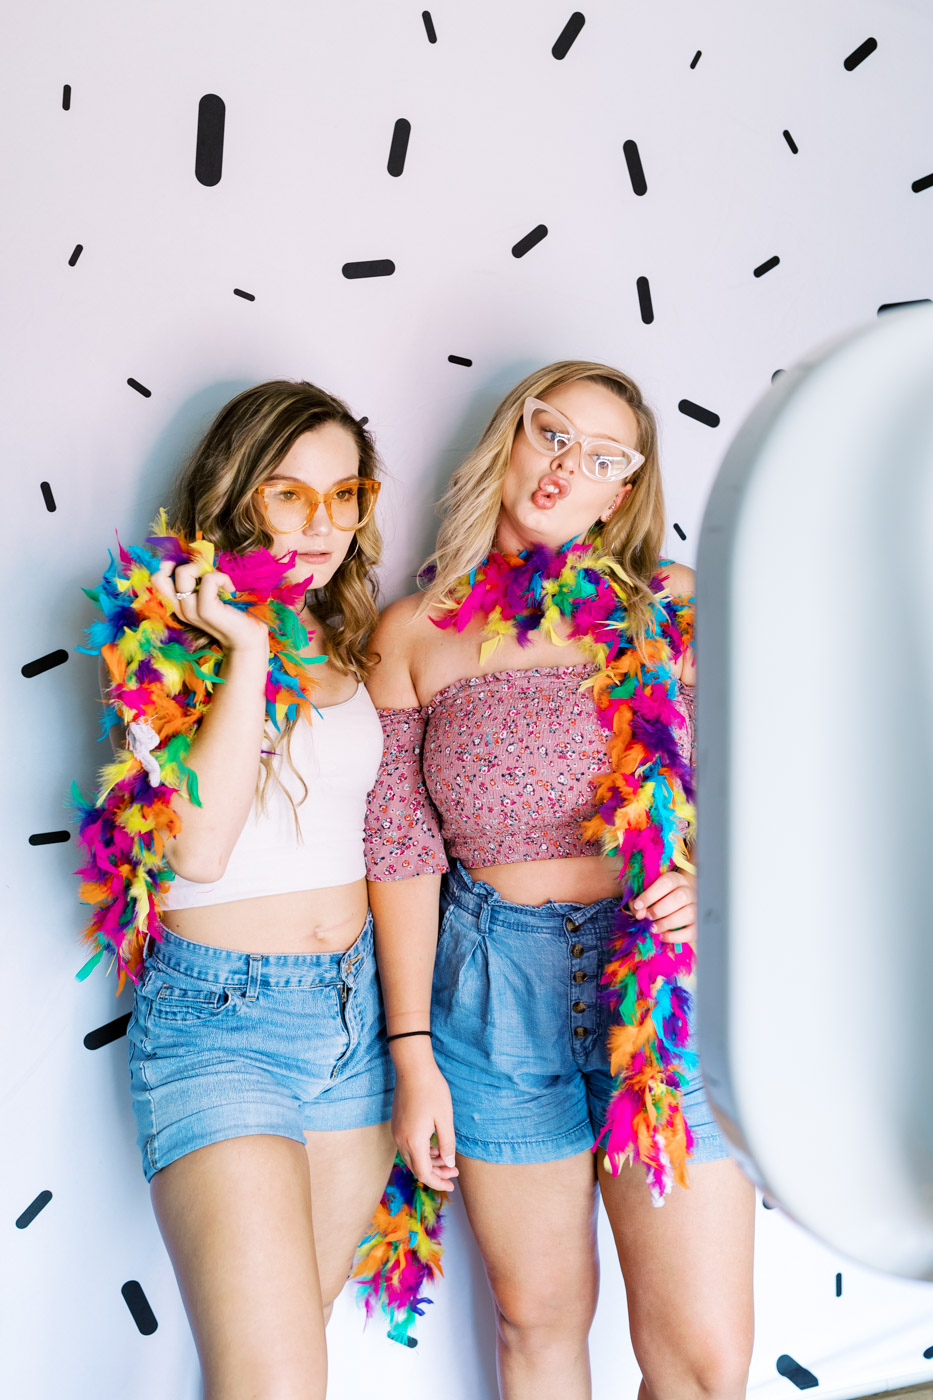 3 Reasons Why You Should Have a Photobooth at Your Wedding